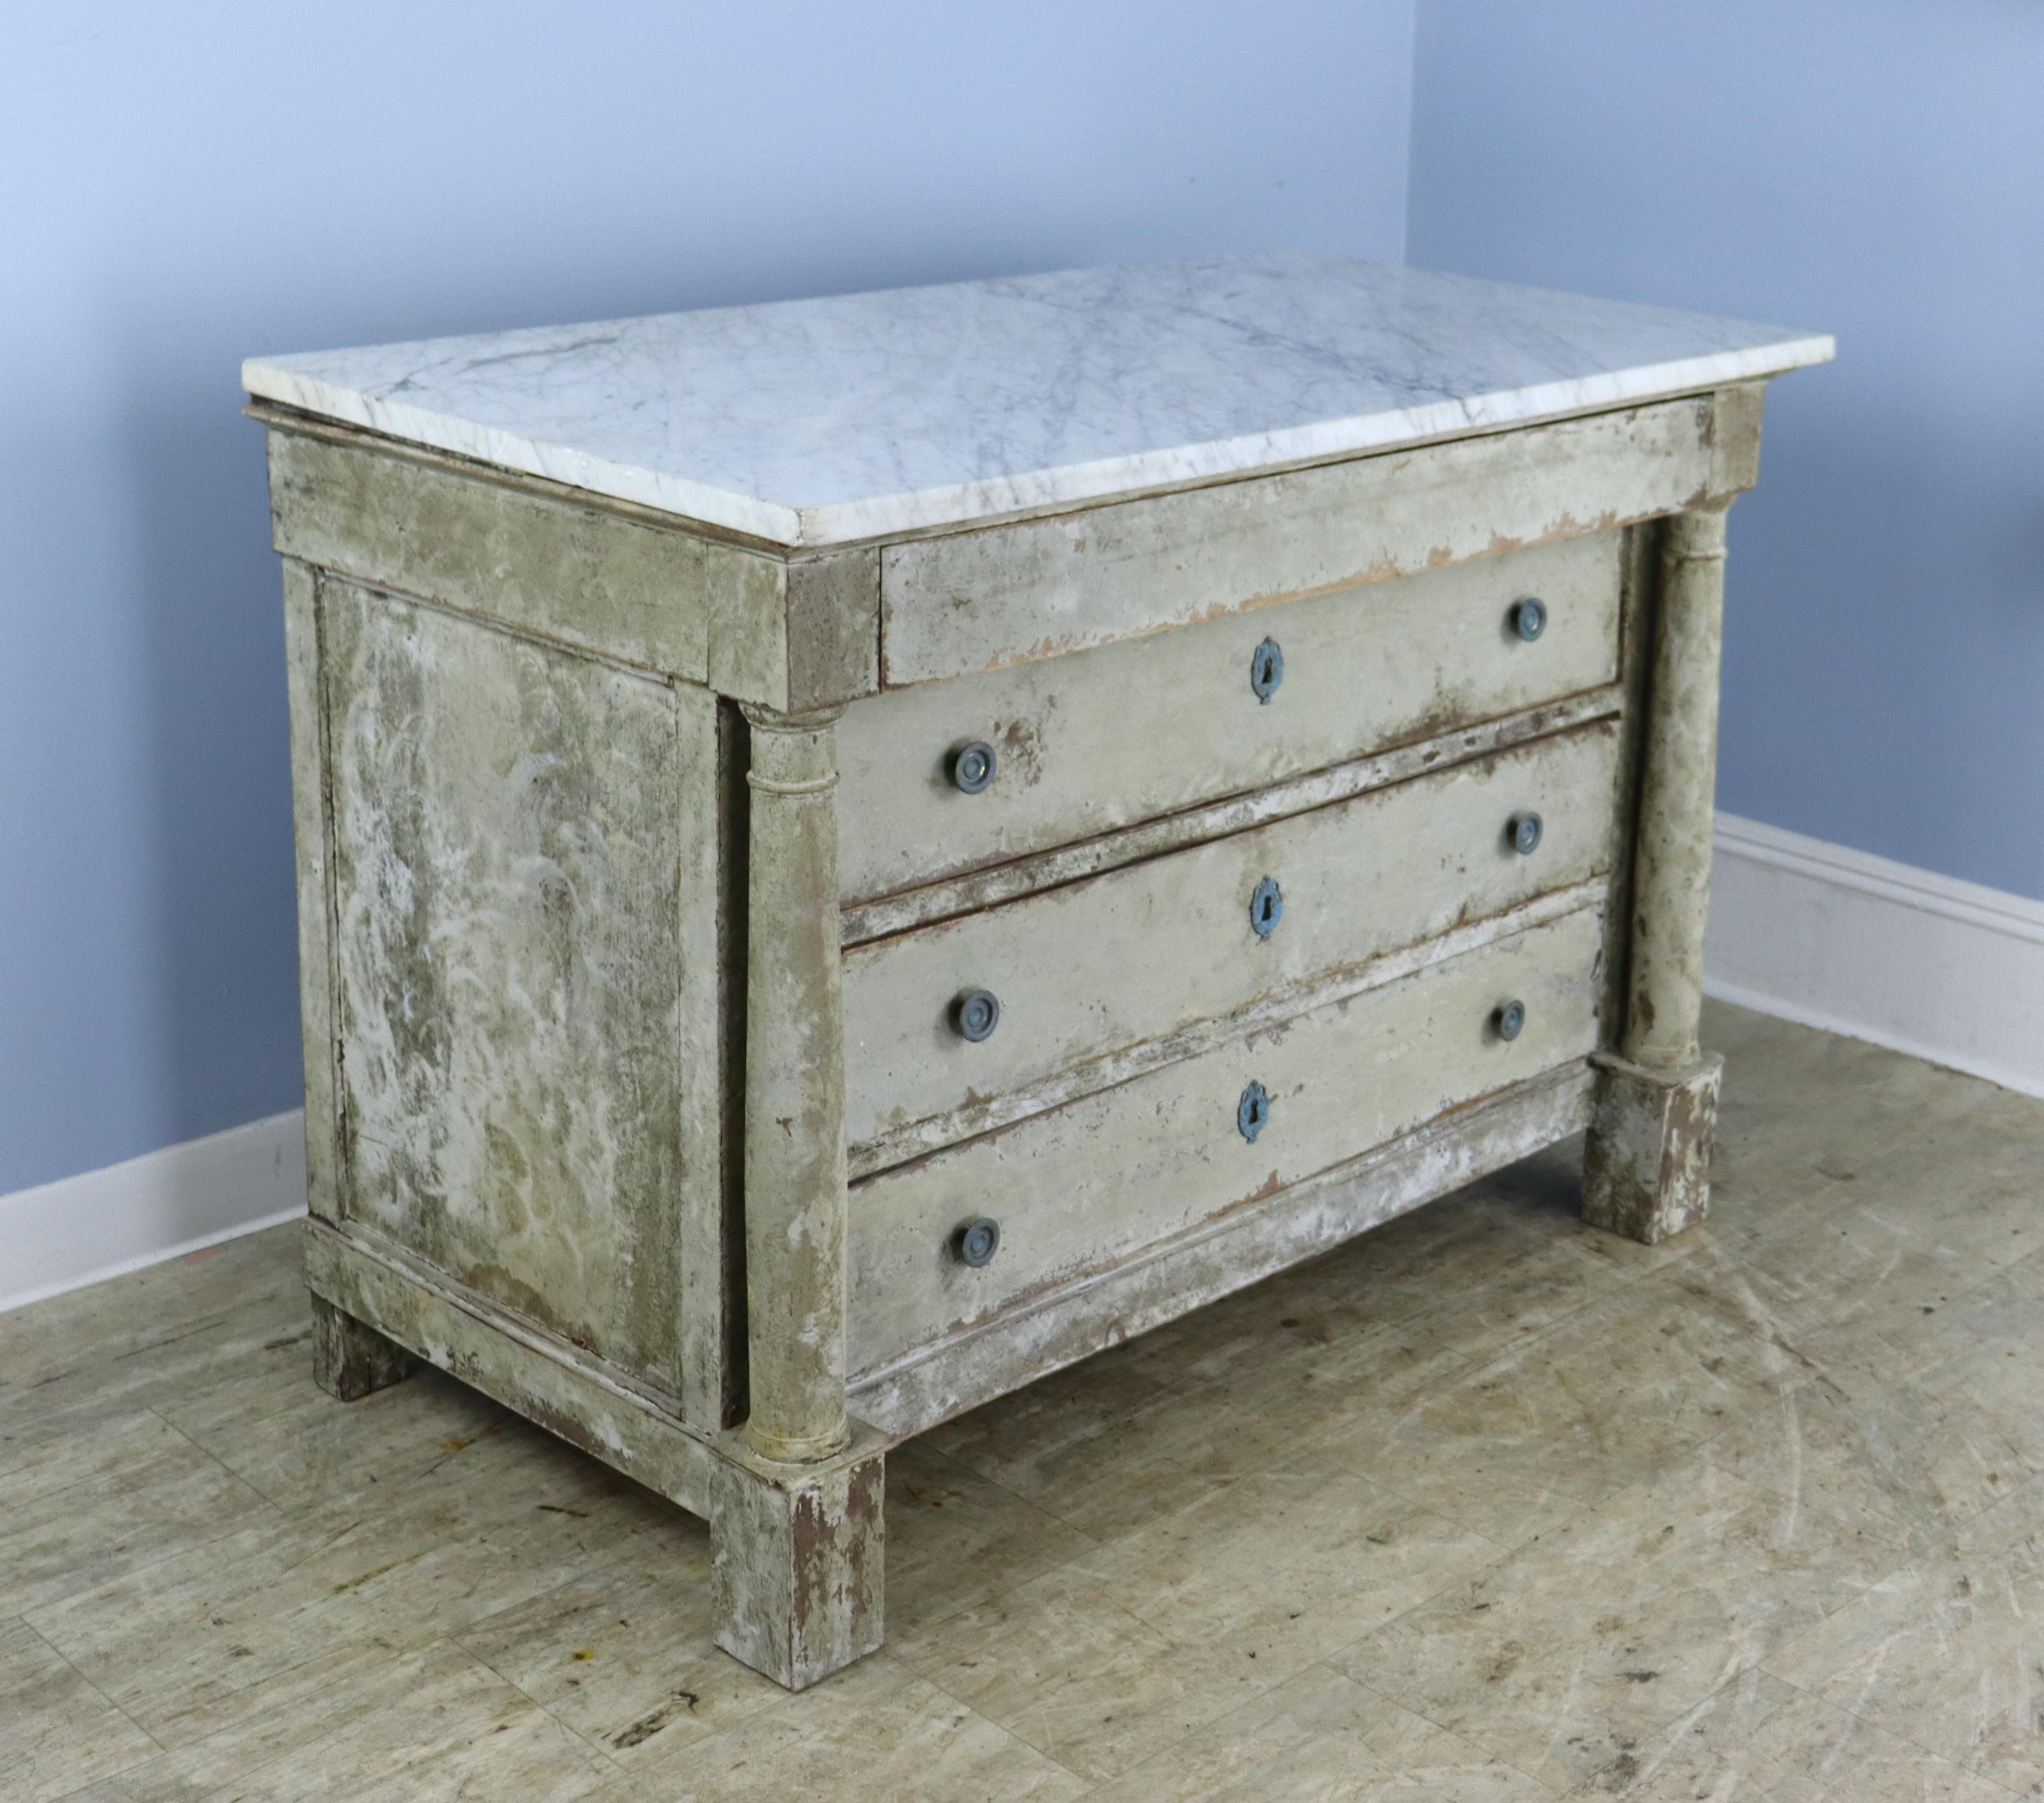 A classic Directoire commode with white marble top and column detail, newly painted in a textured faux distress style.  Four wide drawers and front block feet.  Brasses have been painted a blue green for a bright verdigris look.  Some light